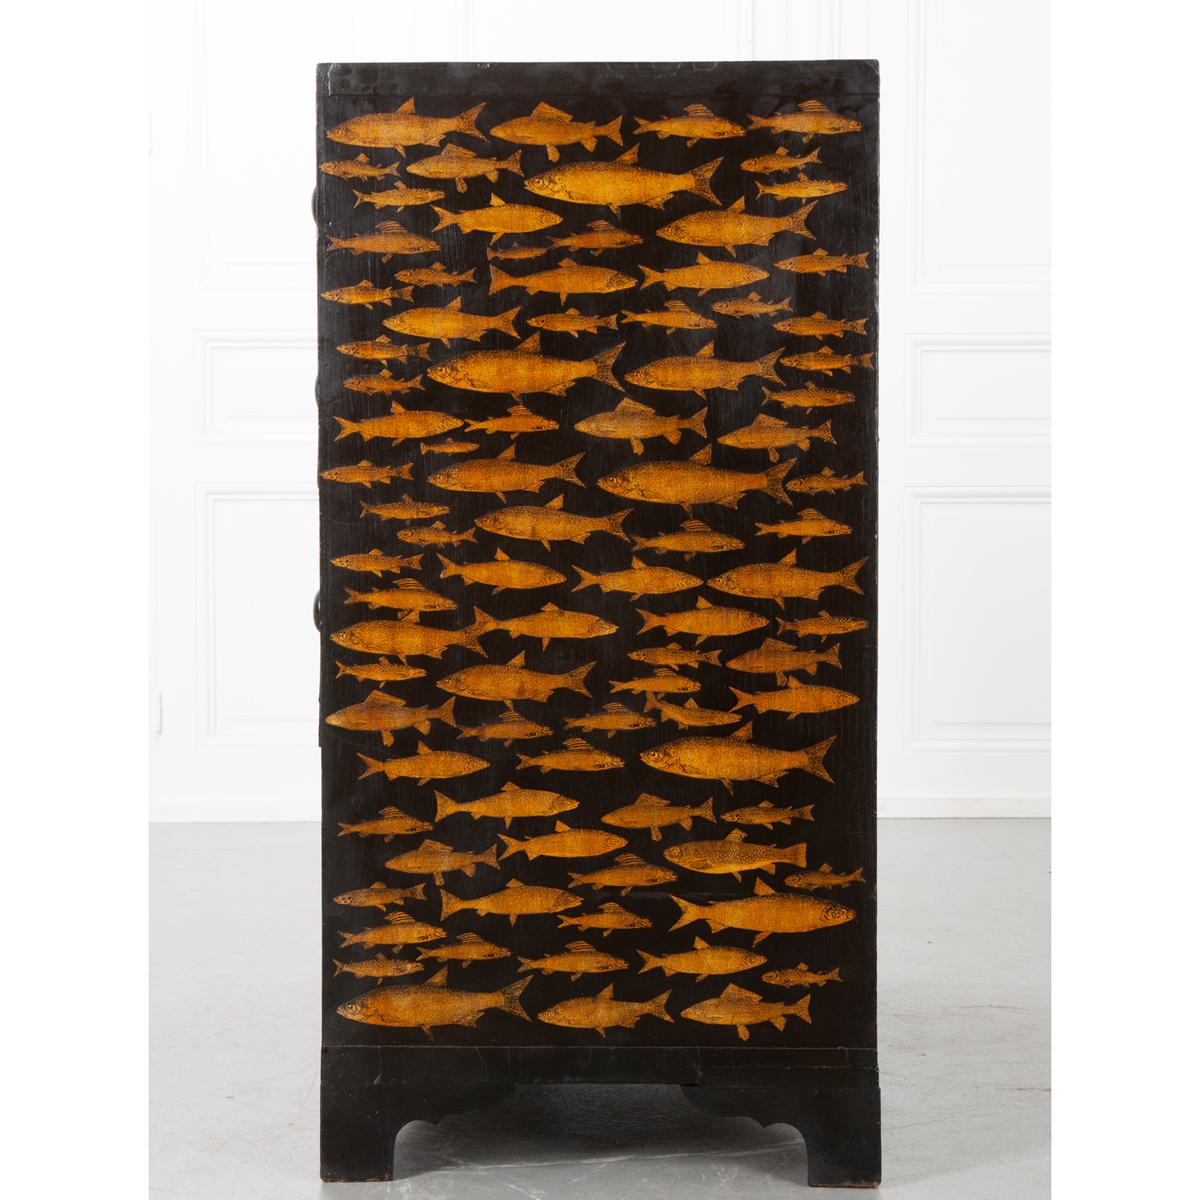 Other English 19th Century Chest with Fish Decoupage Motif